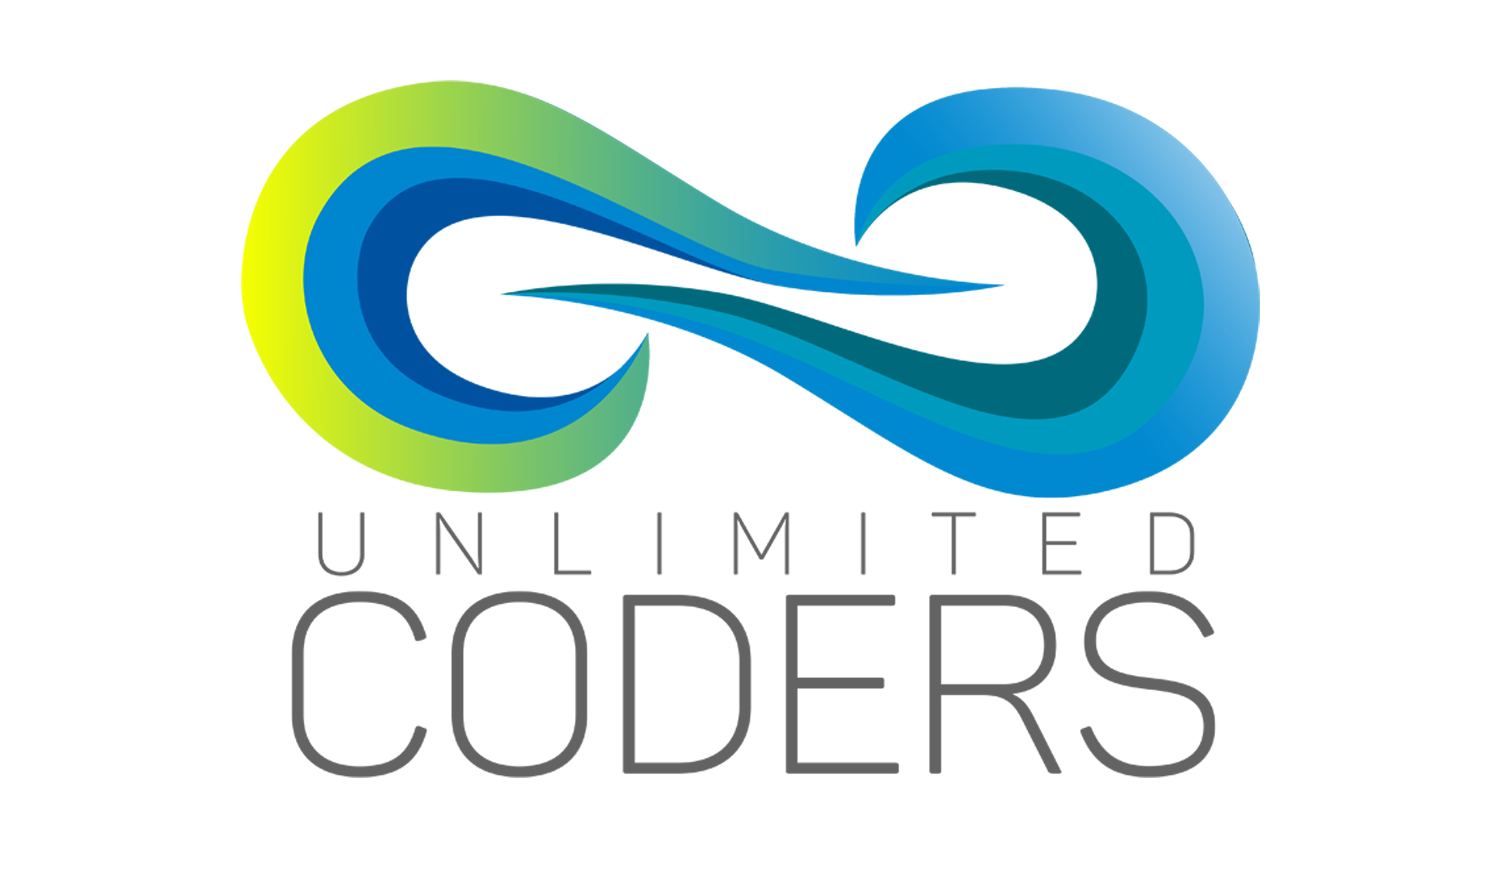 Unlimited Coders